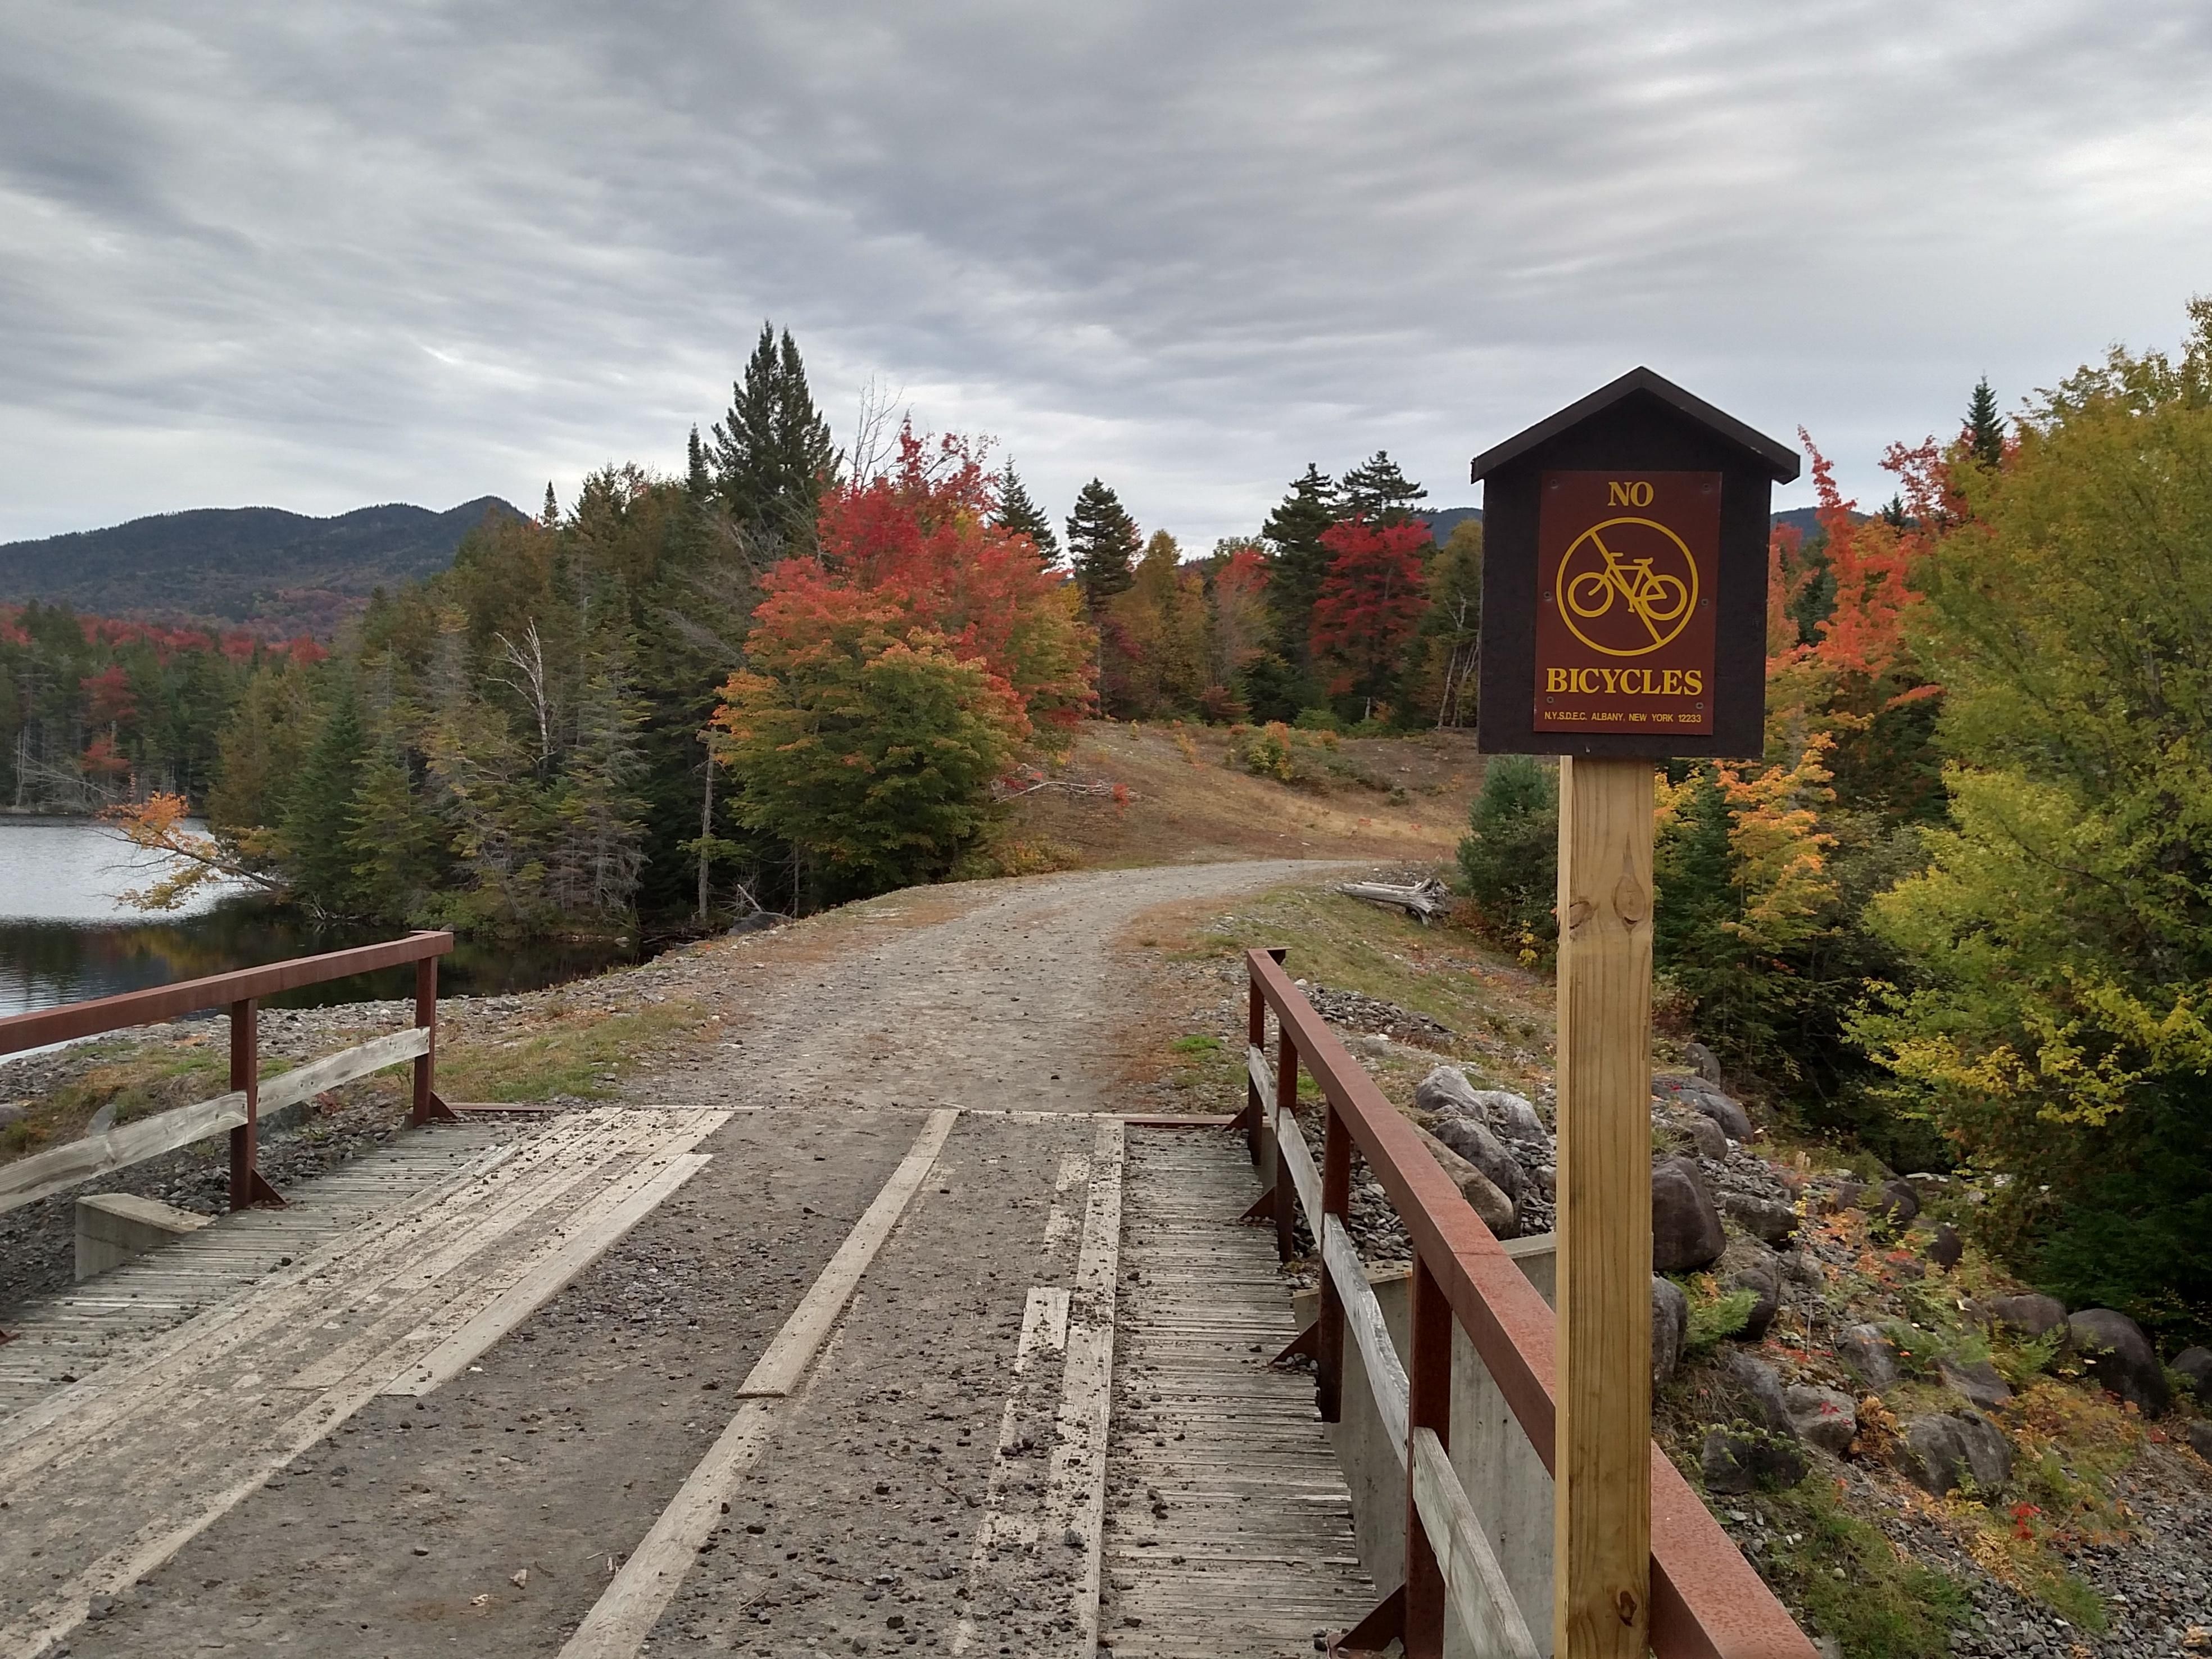 This bridge carries a road over the Boreas River near the dam that forms Boreas Ponds, a manmade impoundment.